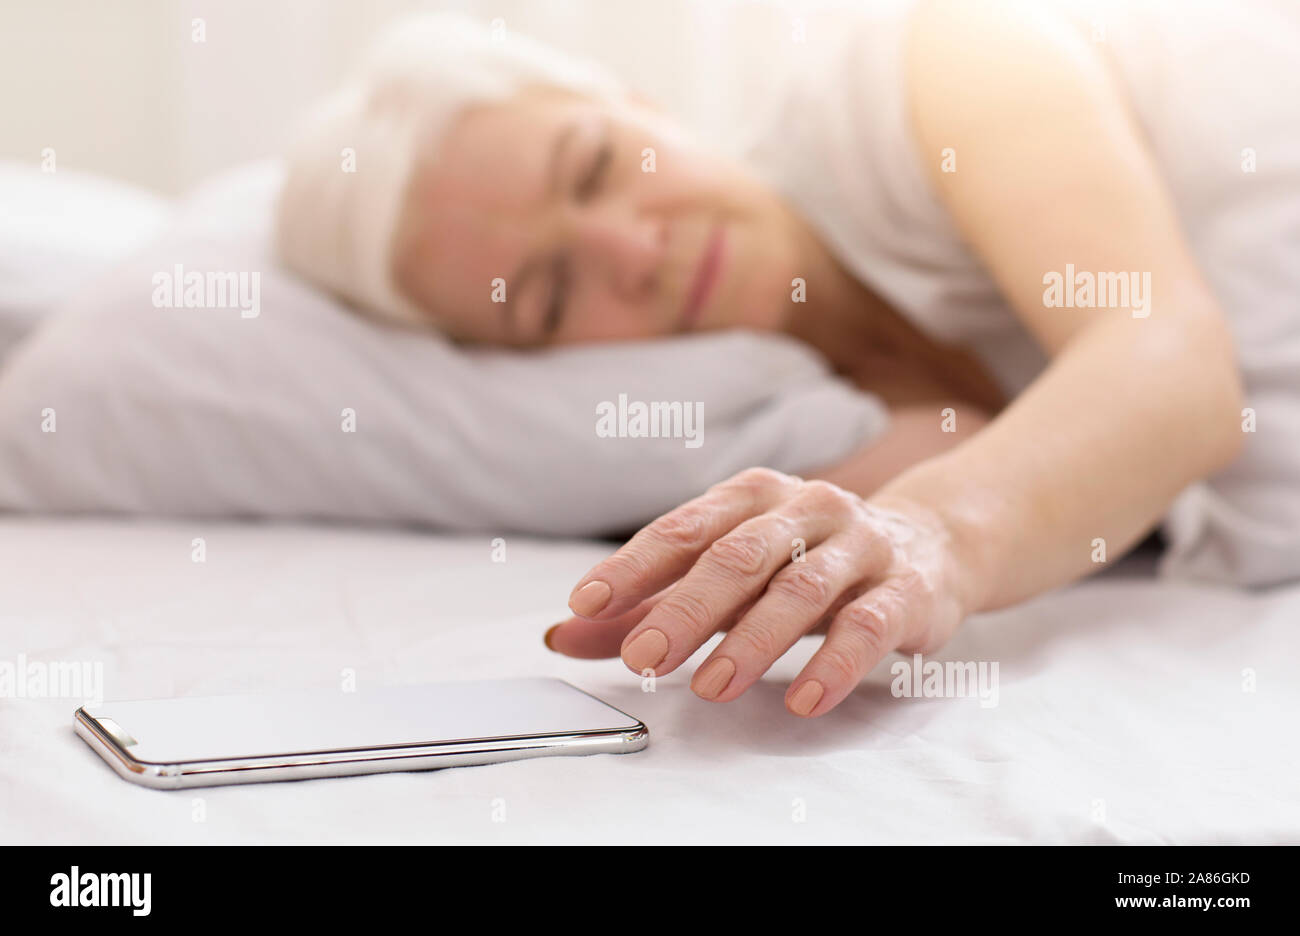 Senior woman waking up in her bed and checking her phone Stock Photo